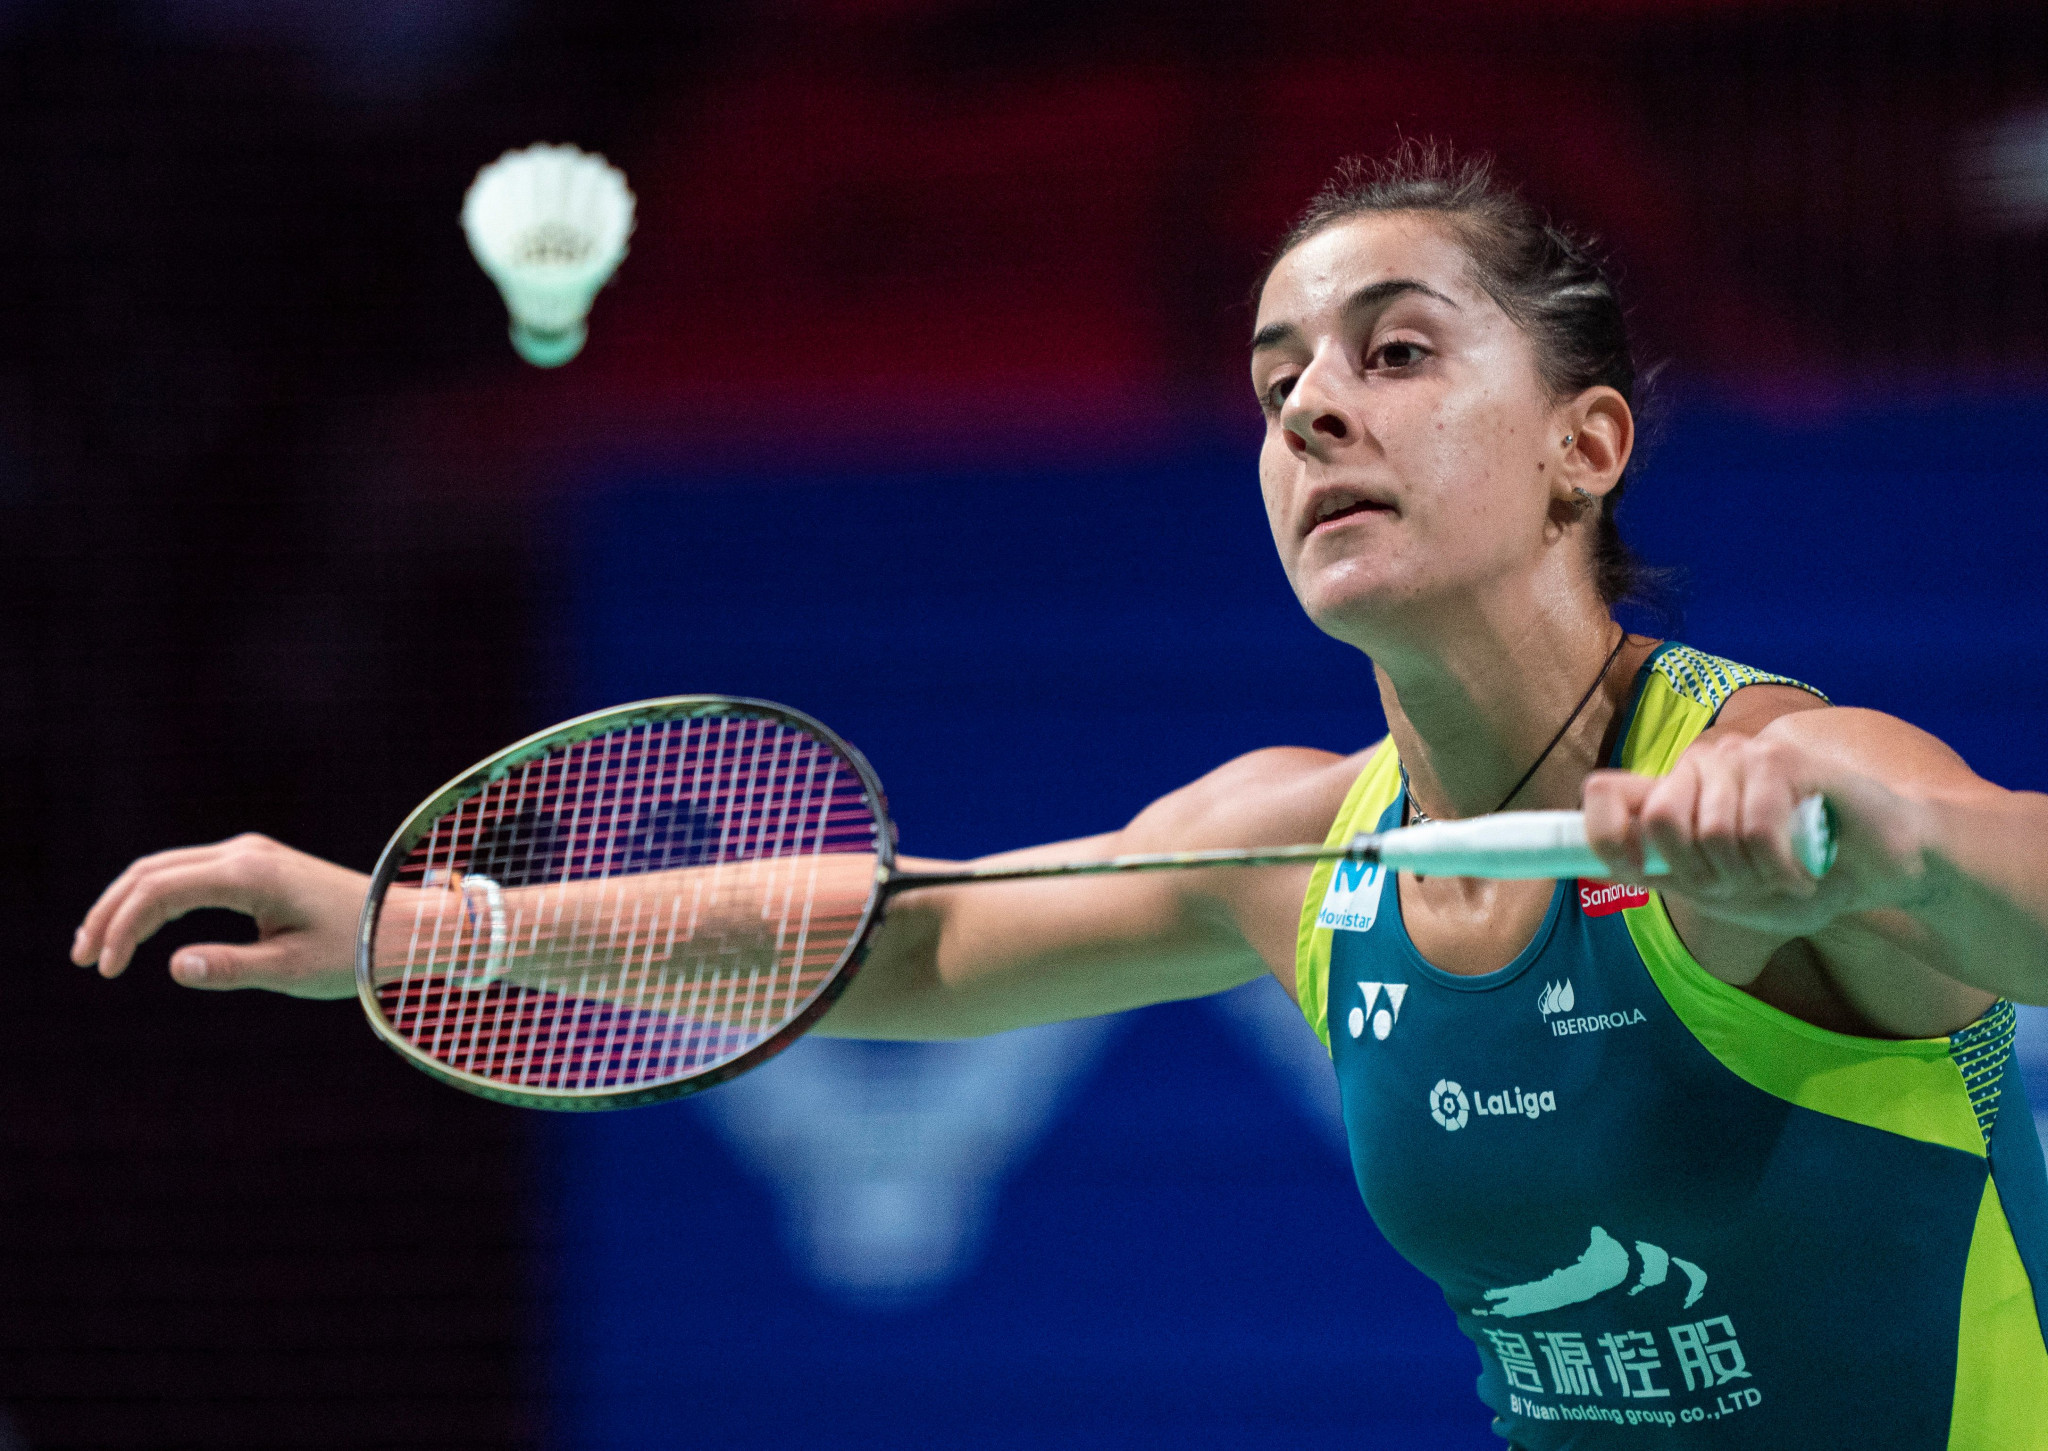 Olympic champion Carolina Marin had already pulled out of the tournament in Delhi ©Getty Images